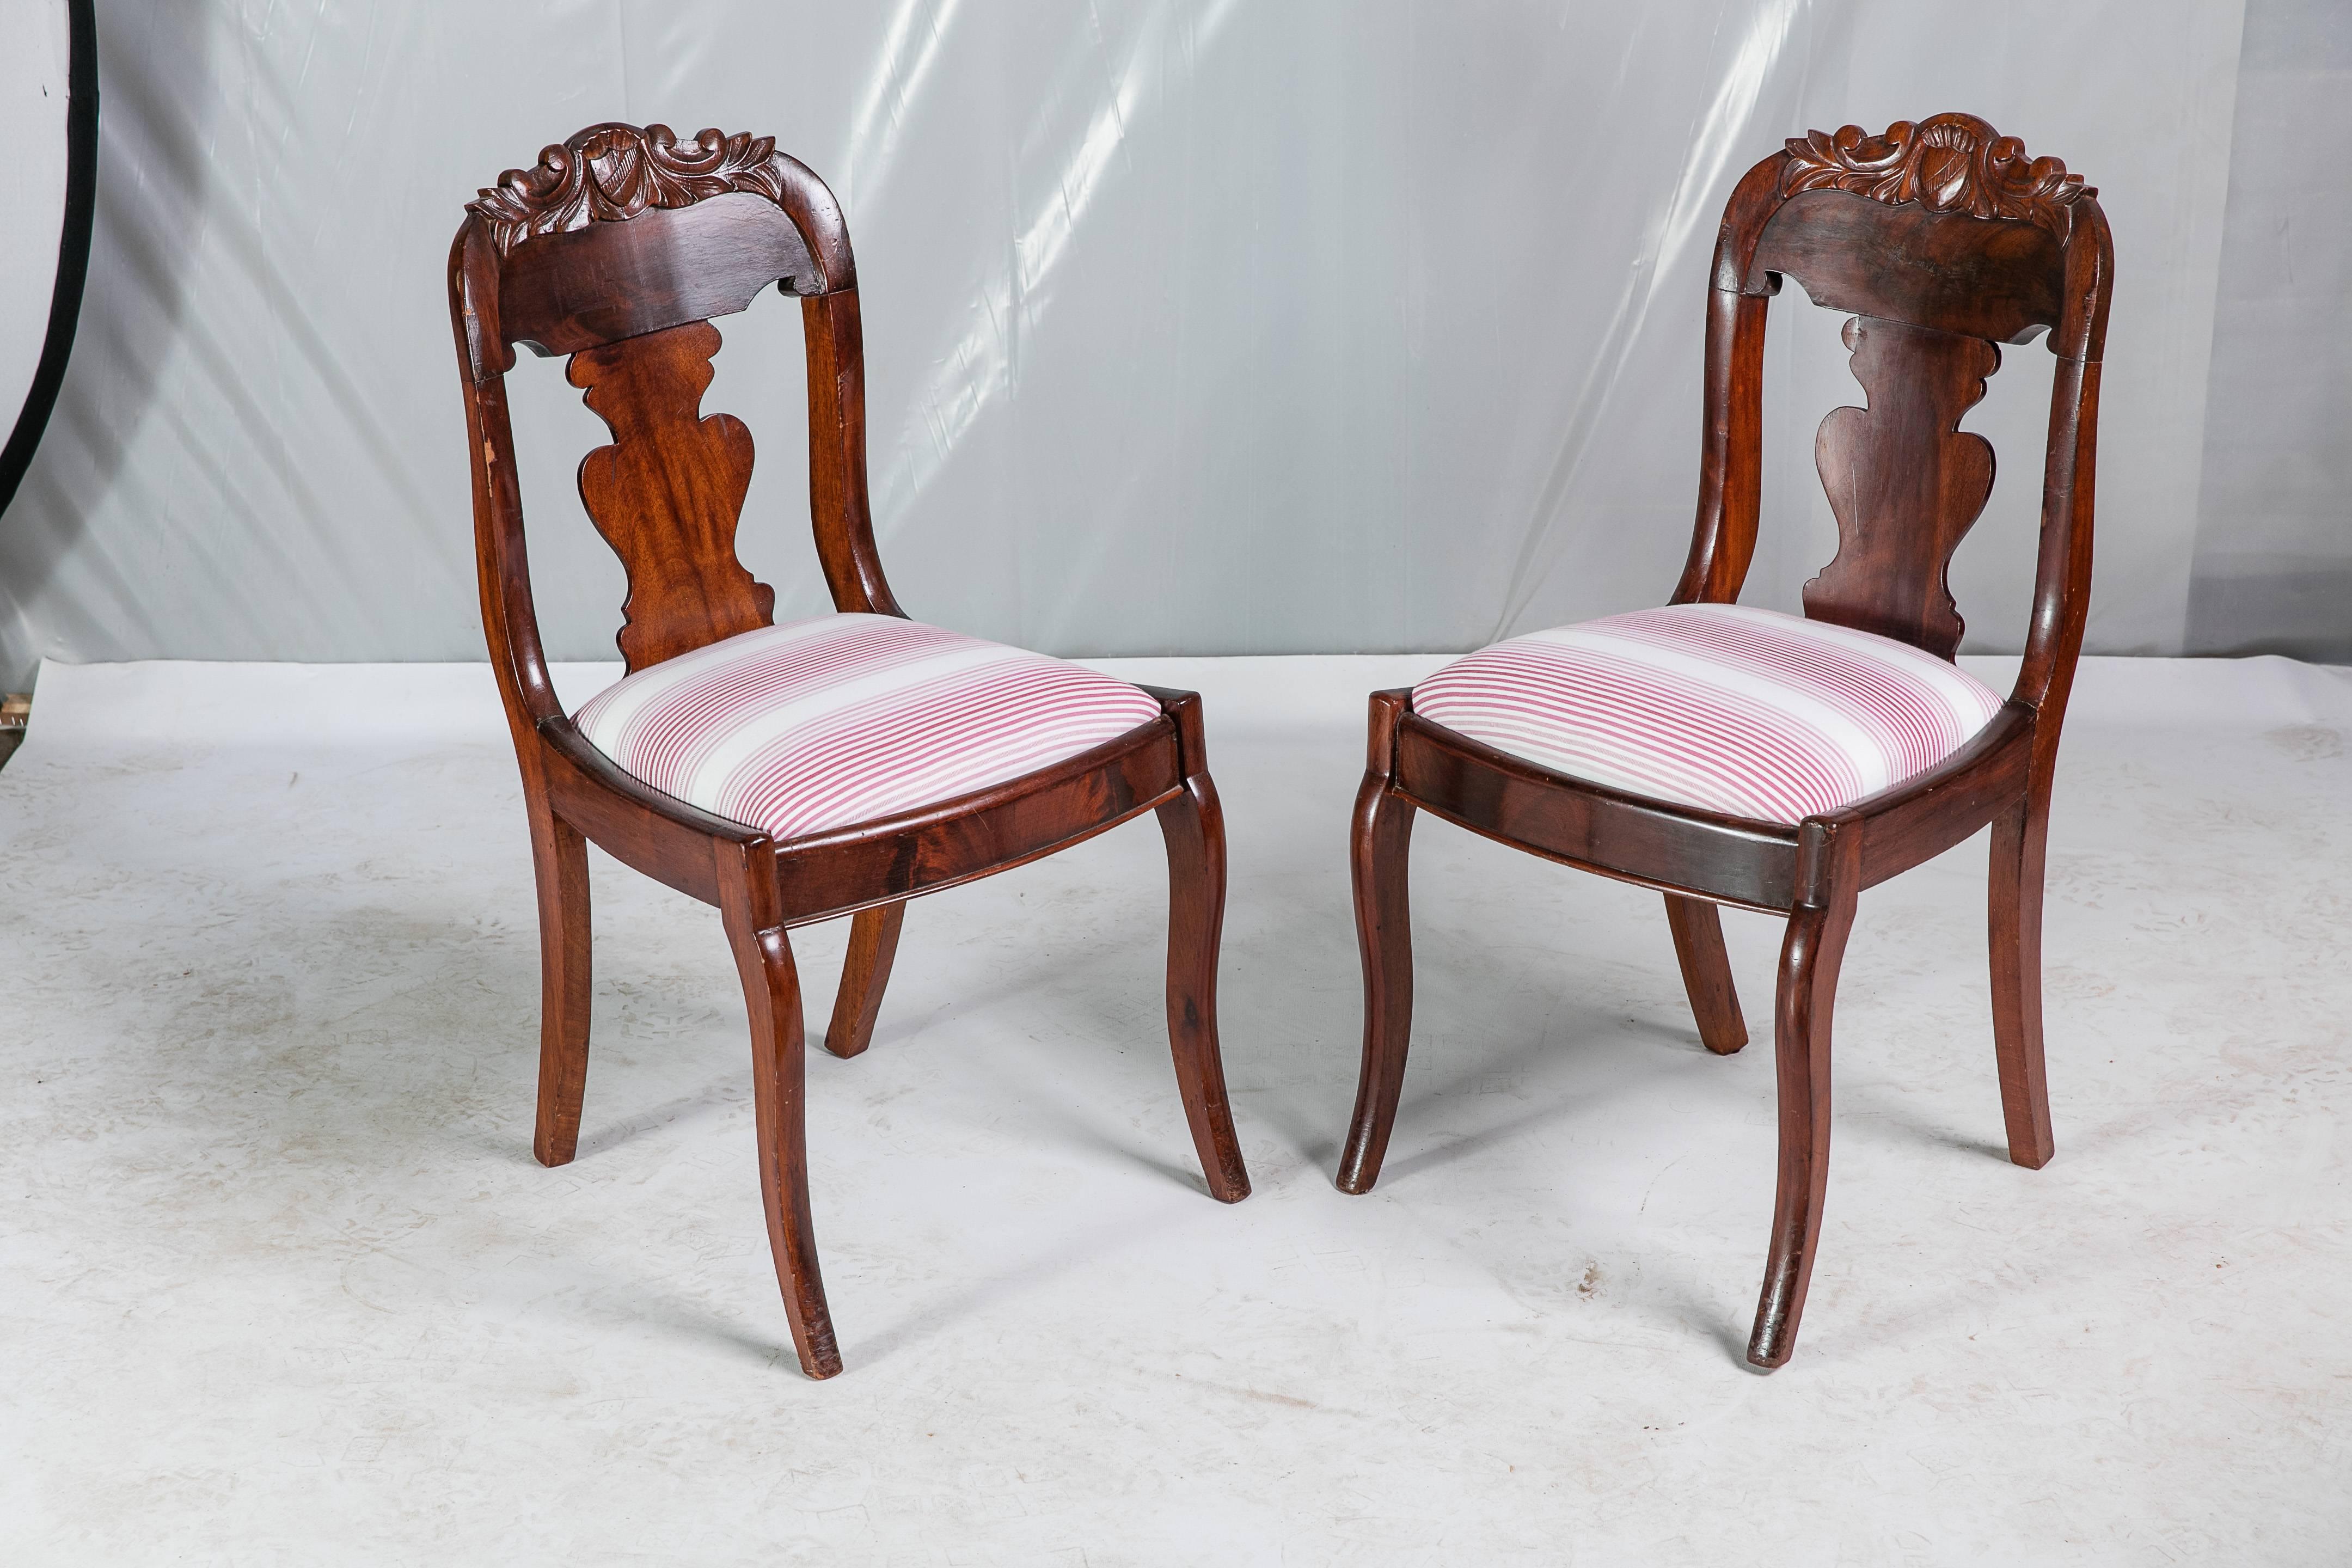 A pair of mid-19th century English shield back hall chairs covered in Madcap Cottage for Robert Allen @ Home Tivoli Stripe fabric in Rhubarb. Note how the rich wood graining and Mahogany-hued stained finish makes the red and white stripe come to